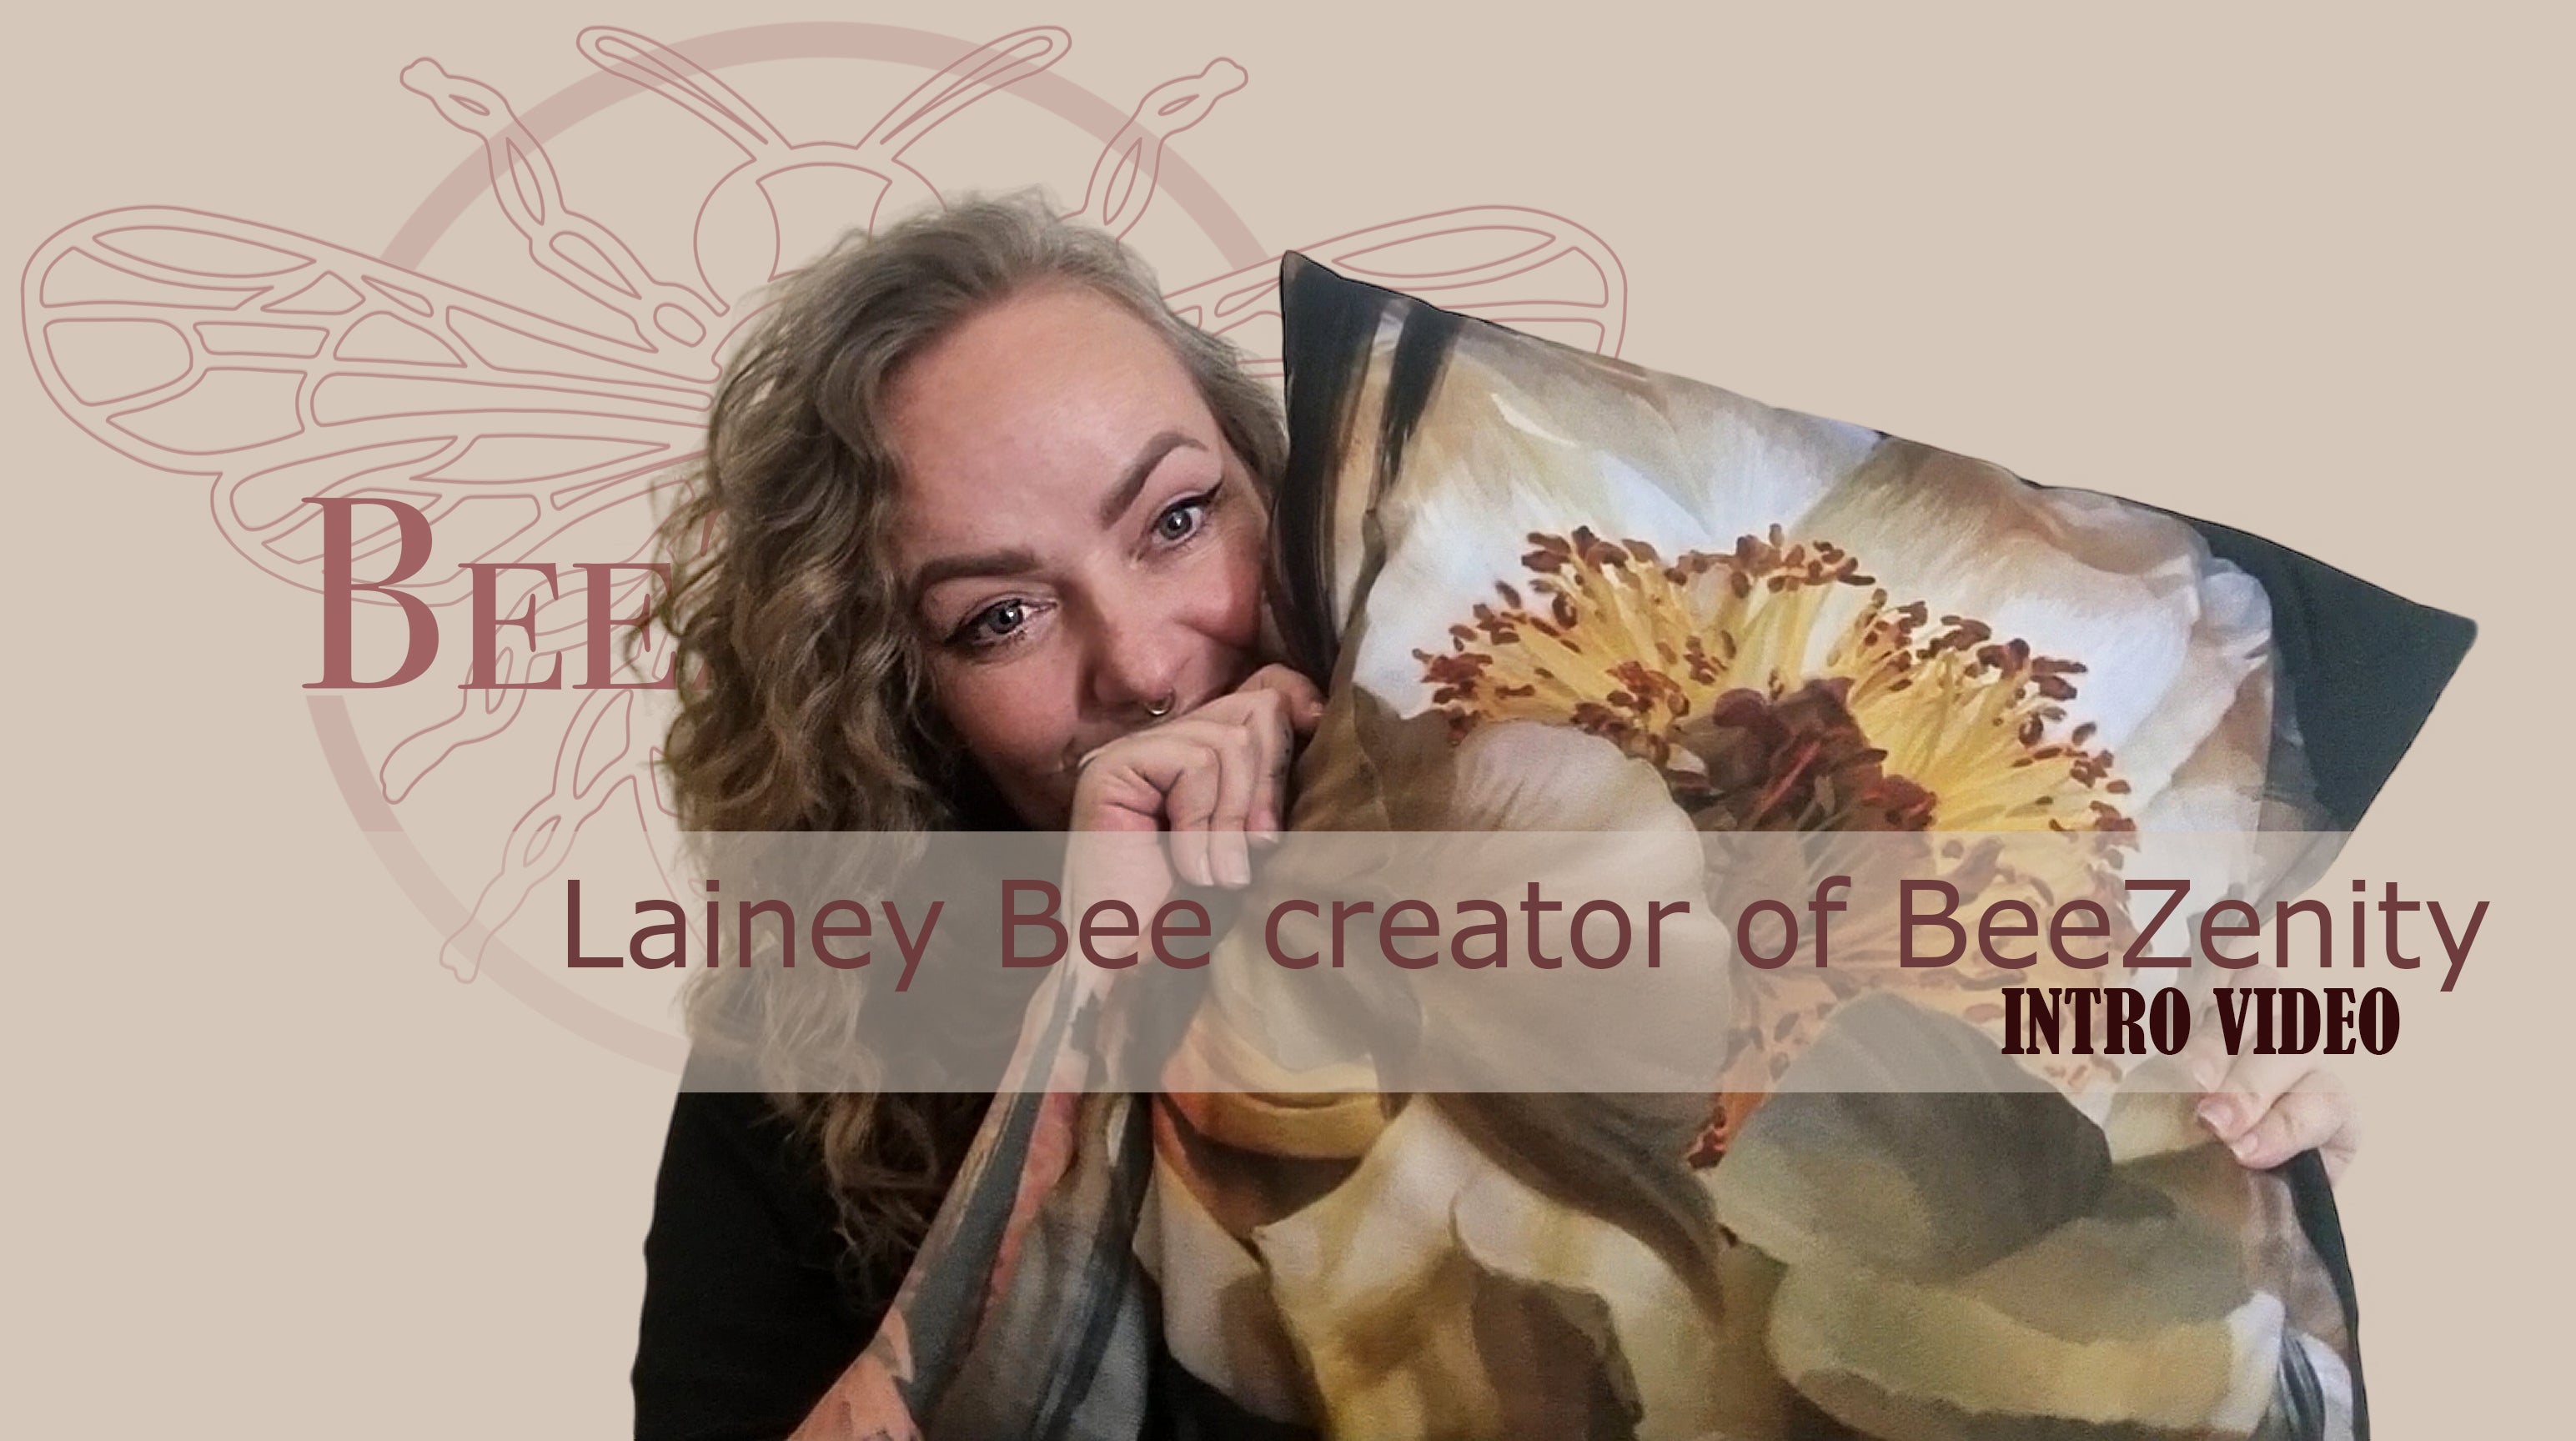 Load video: Beezenity intro Lainey Bee who are we, why, brand, pillowcases